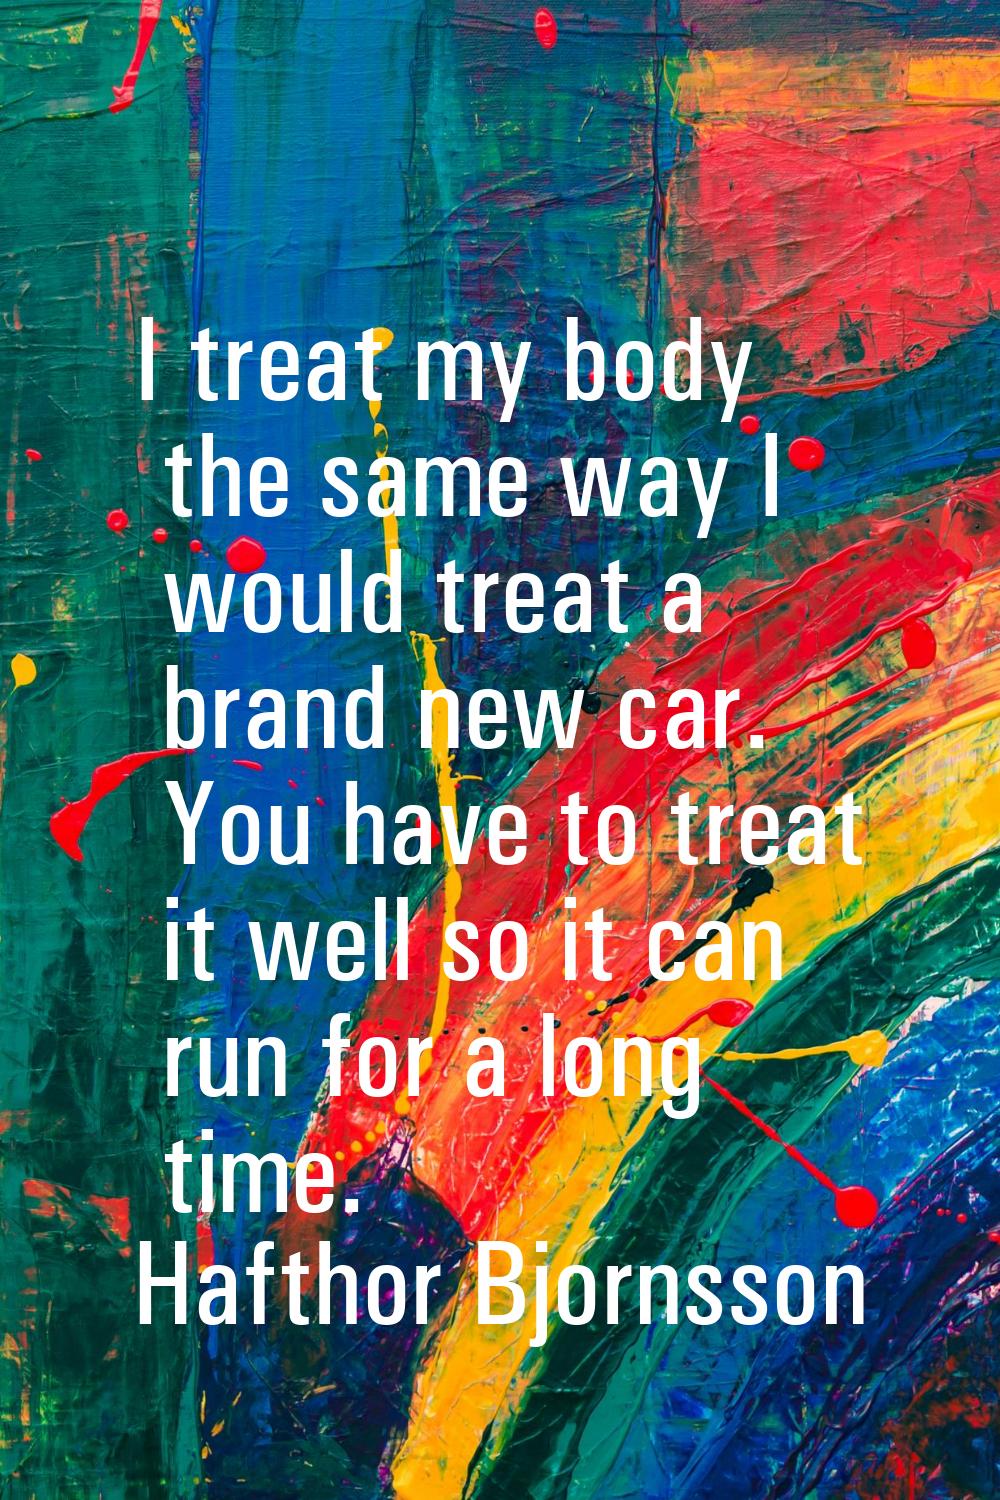 I treat my body the same way I would treat a brand new car. You have to treat it well so it can run